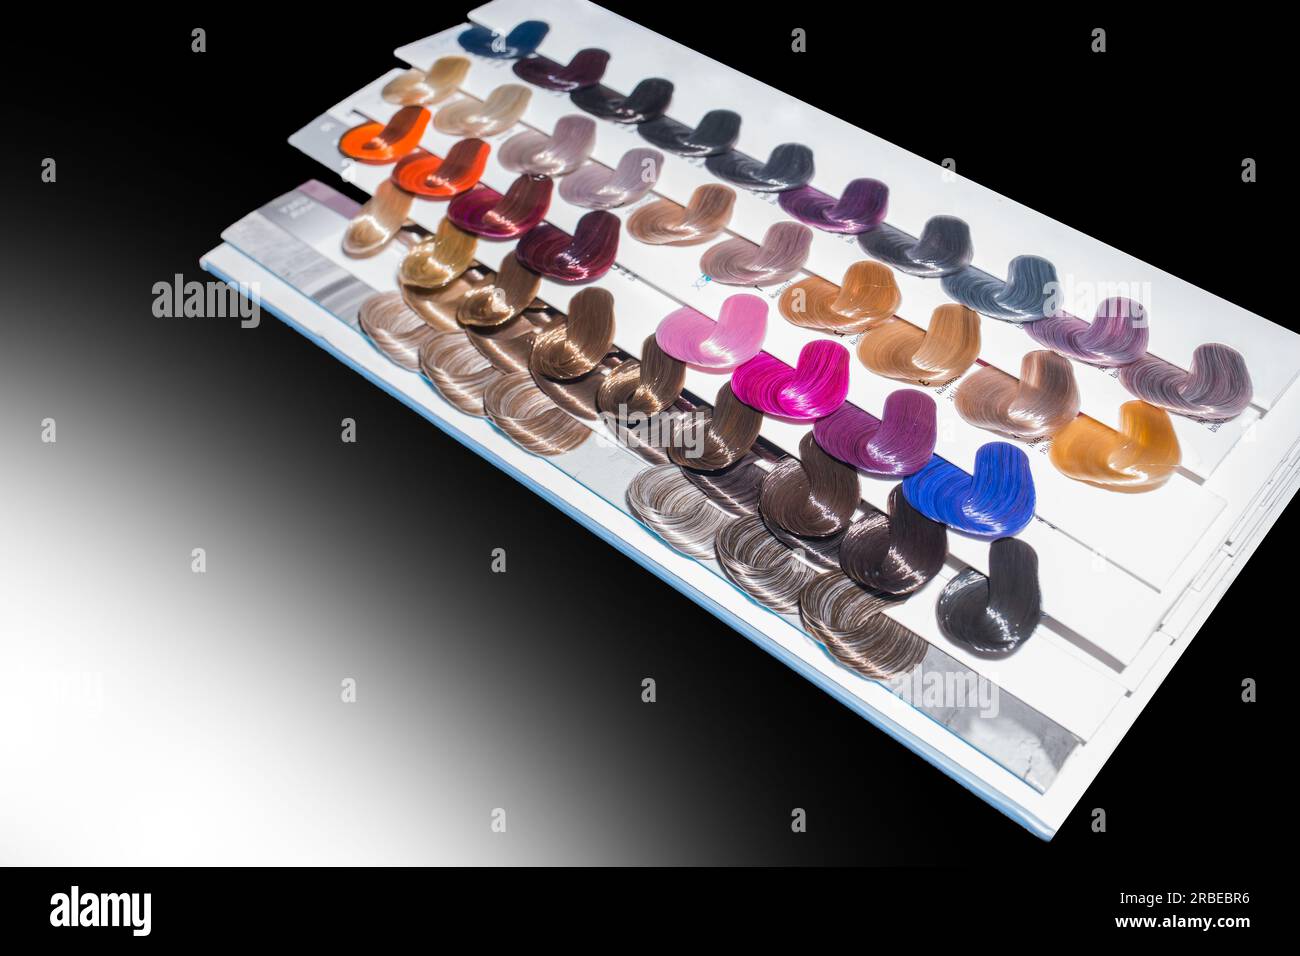 Miscellaneous various samples color palette dye coloring hair shade tint on black and white background isolated. Stock Photo